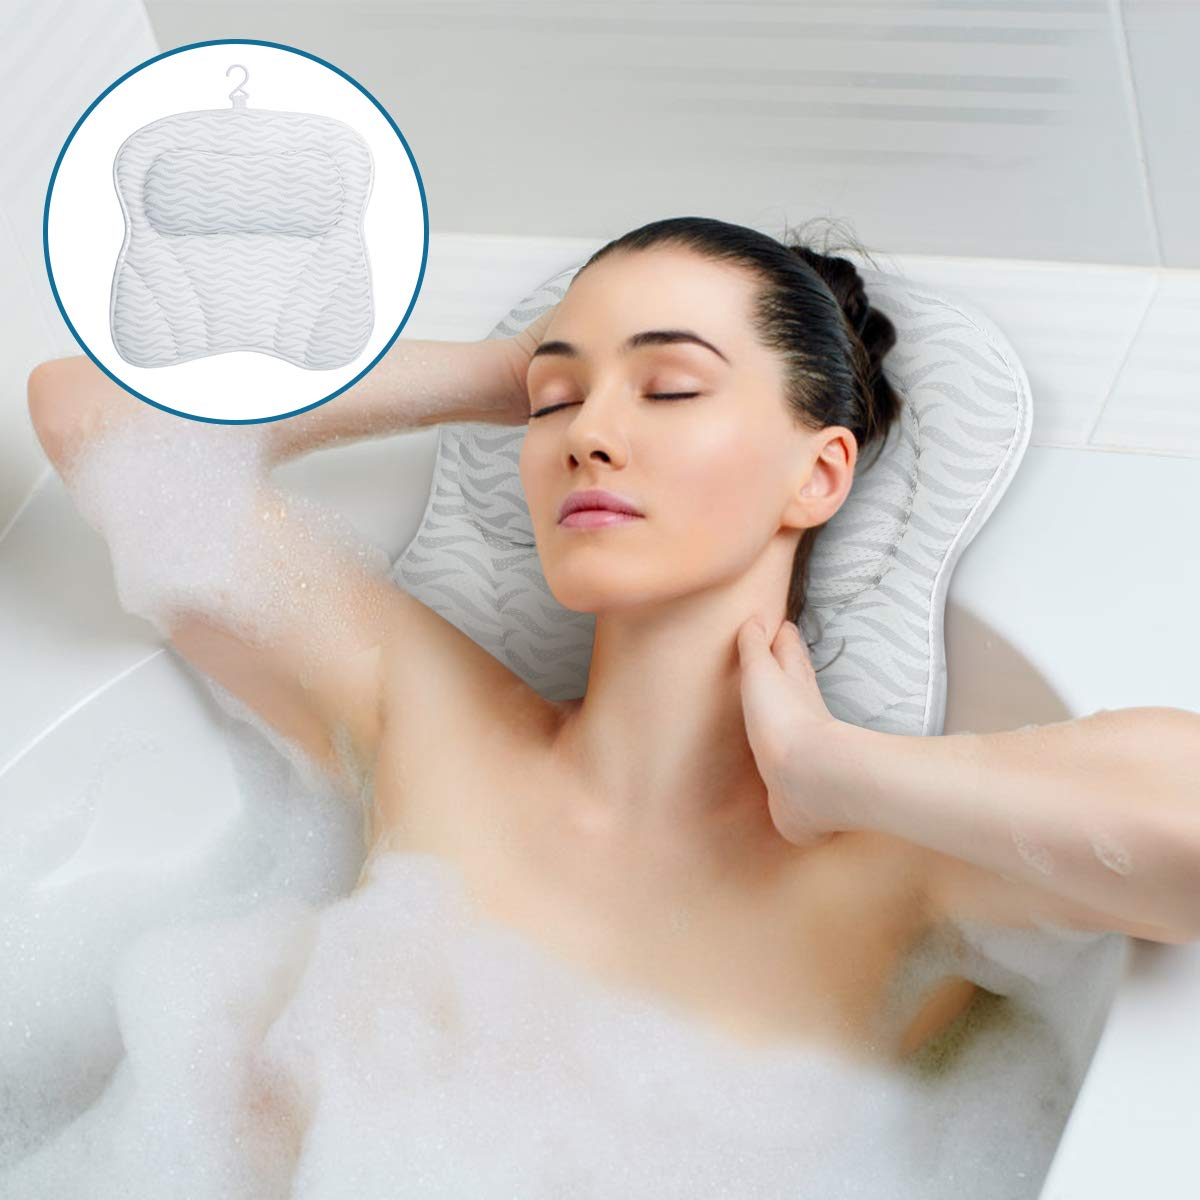 YEERSWAG-Bath-Pillow-Spirity-Ergonomic-with-Neck-and-Back-Support-Comfortable-Bathtub-Pillows-for-Re-1945900-4